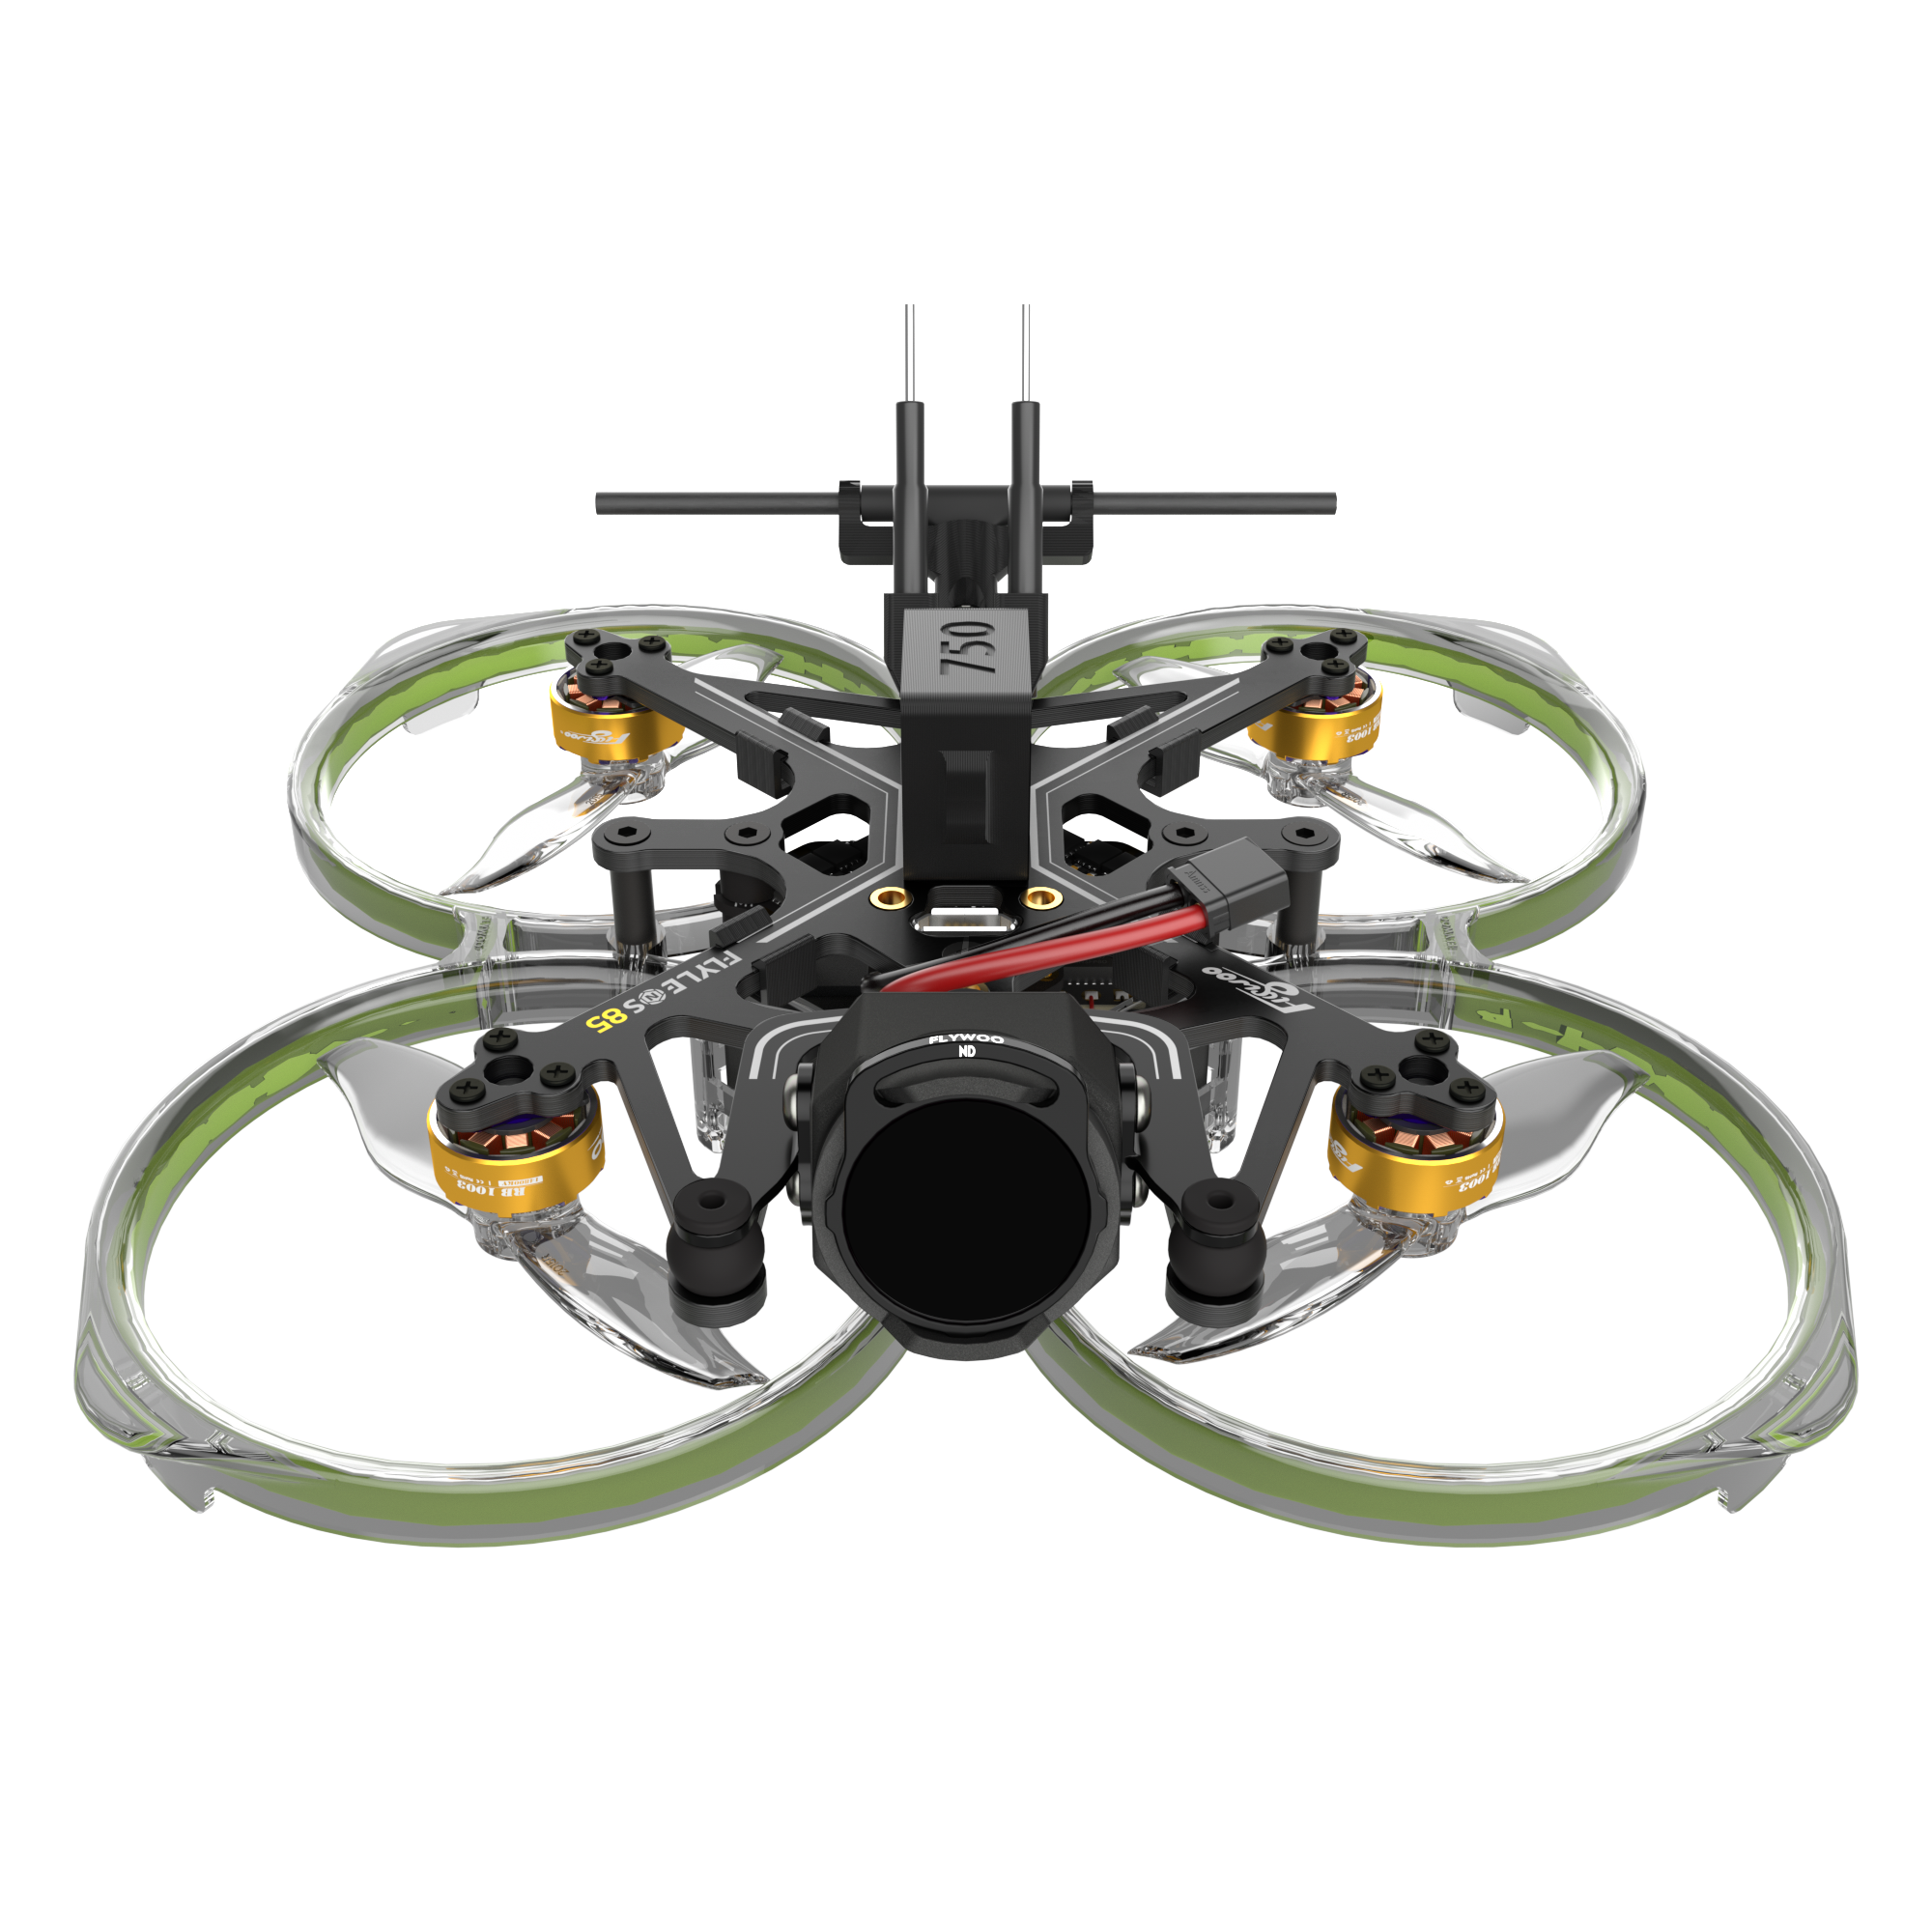 FlyLens 85 HD O3 2S Brushless Whoop FPV Drone